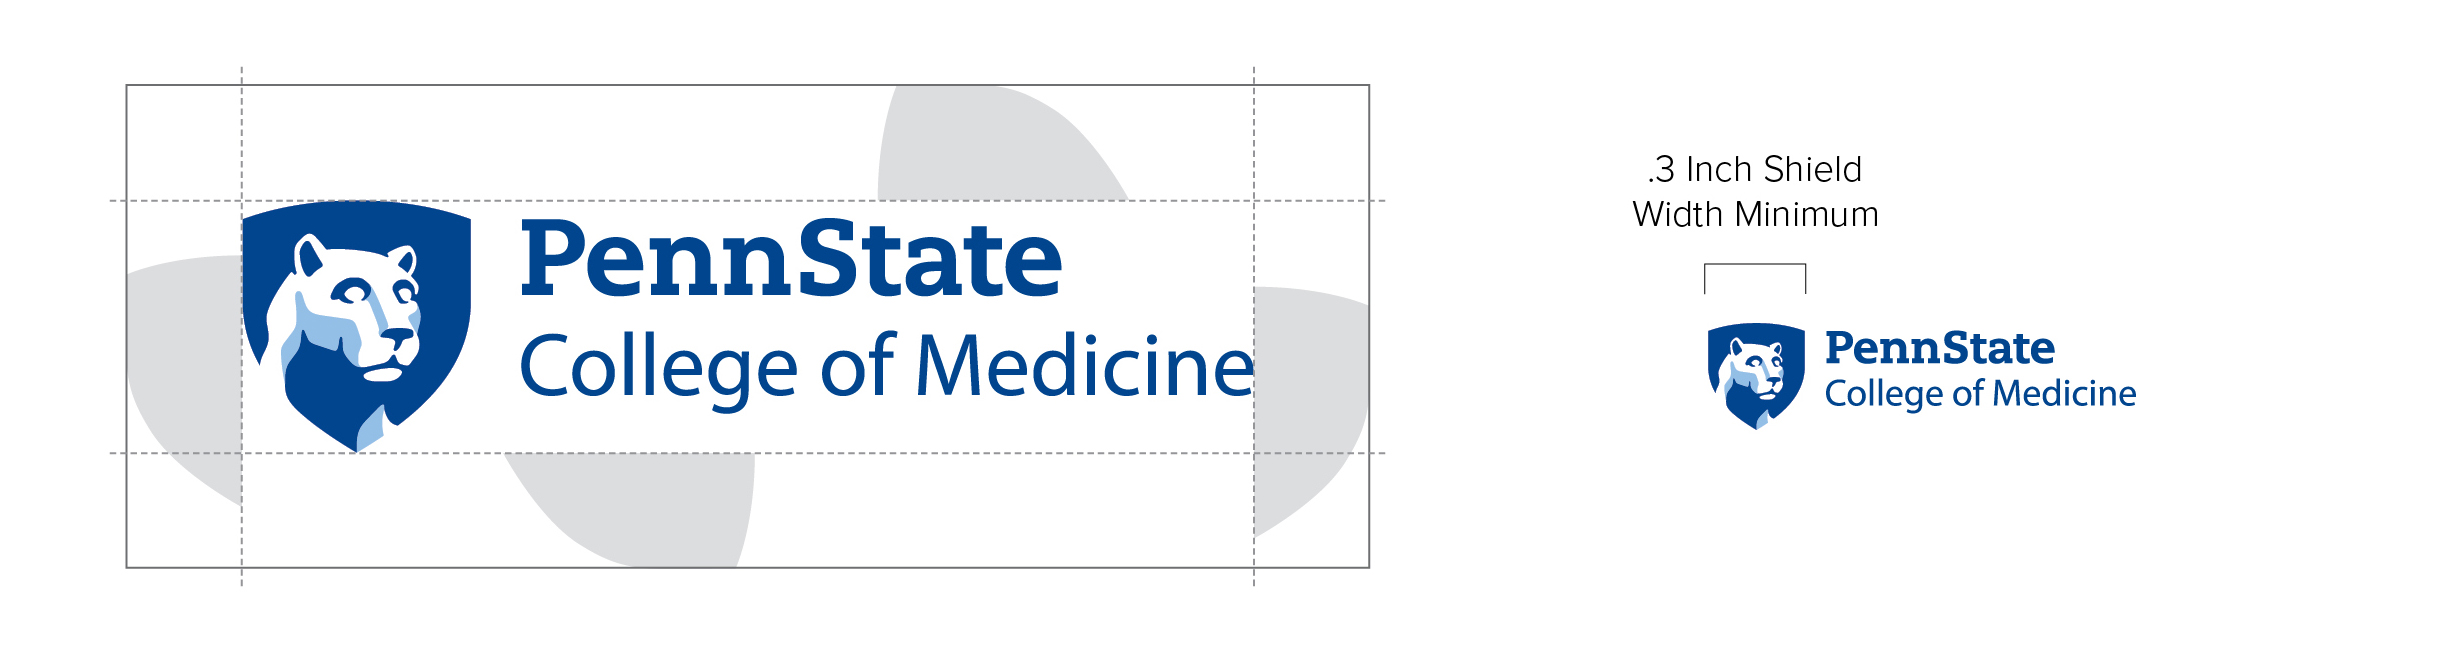 Penn State College of Medicine logo diagram showing clear space around the logo and .3-inch shield width minimum